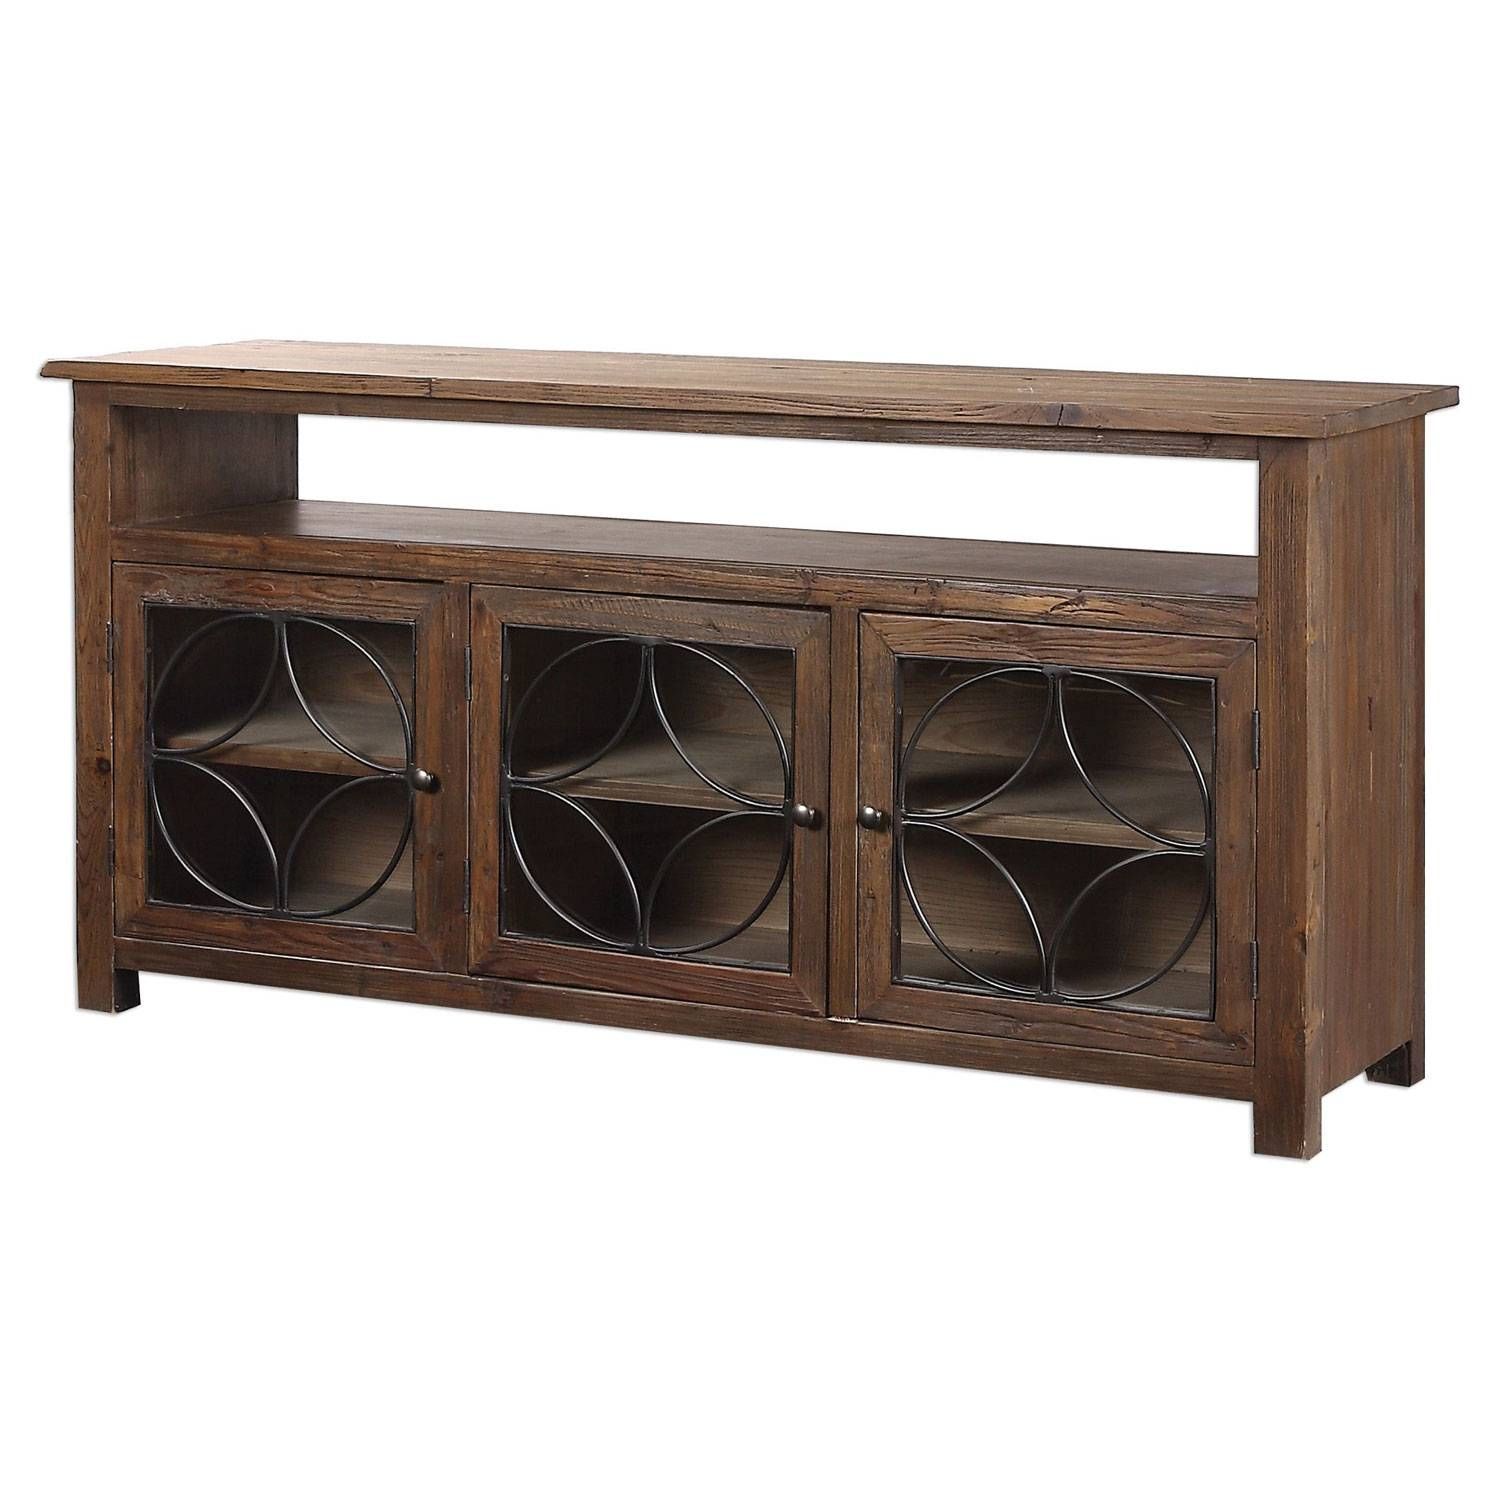 Rattan Wood Buffets And Sideboards | Bellacor Throughout Sideboards For Sale (View 20 of 30)